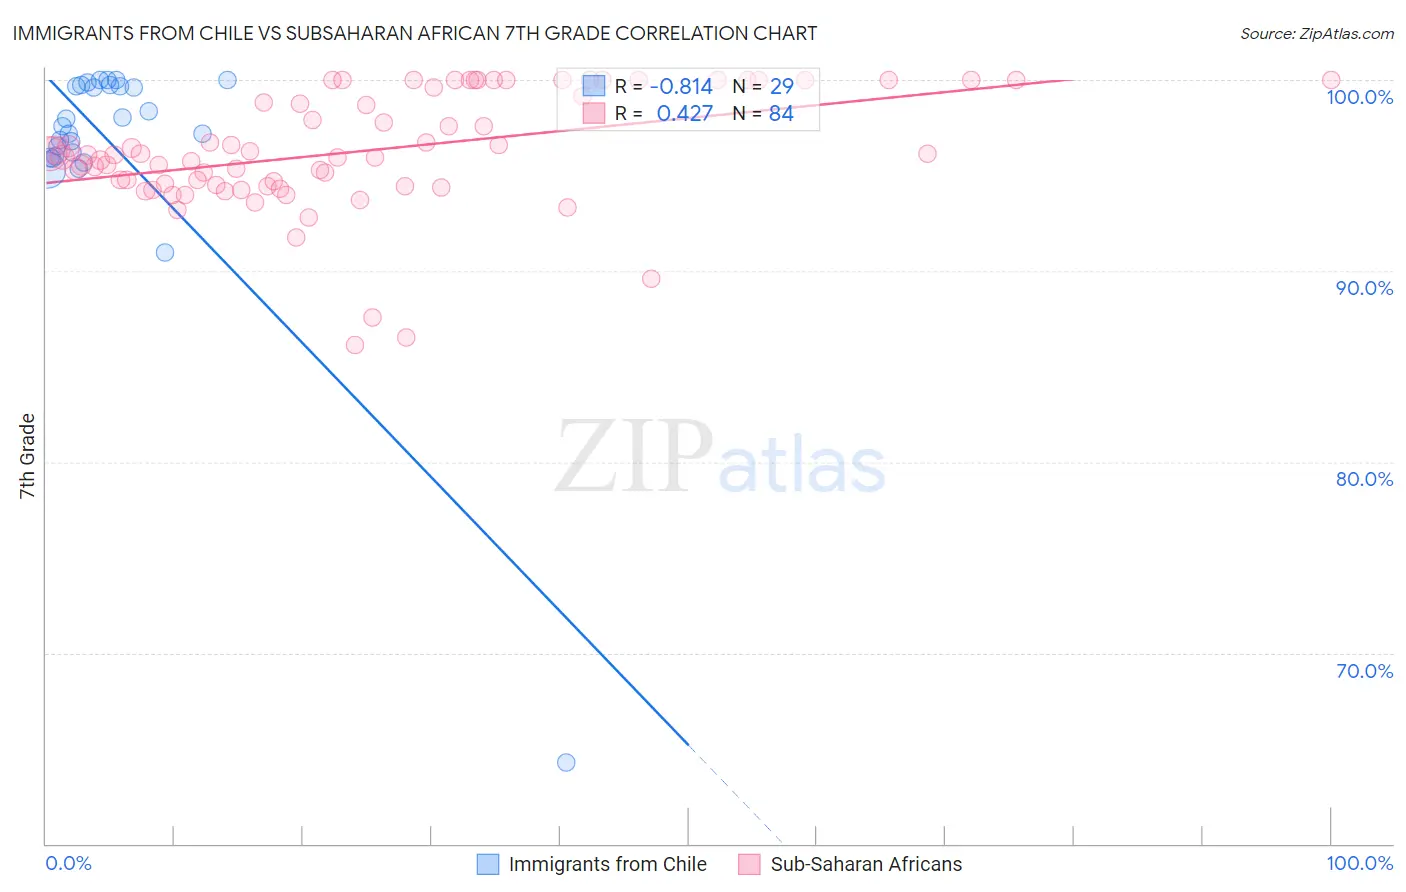 Immigrants from Chile vs Subsaharan African 7th Grade